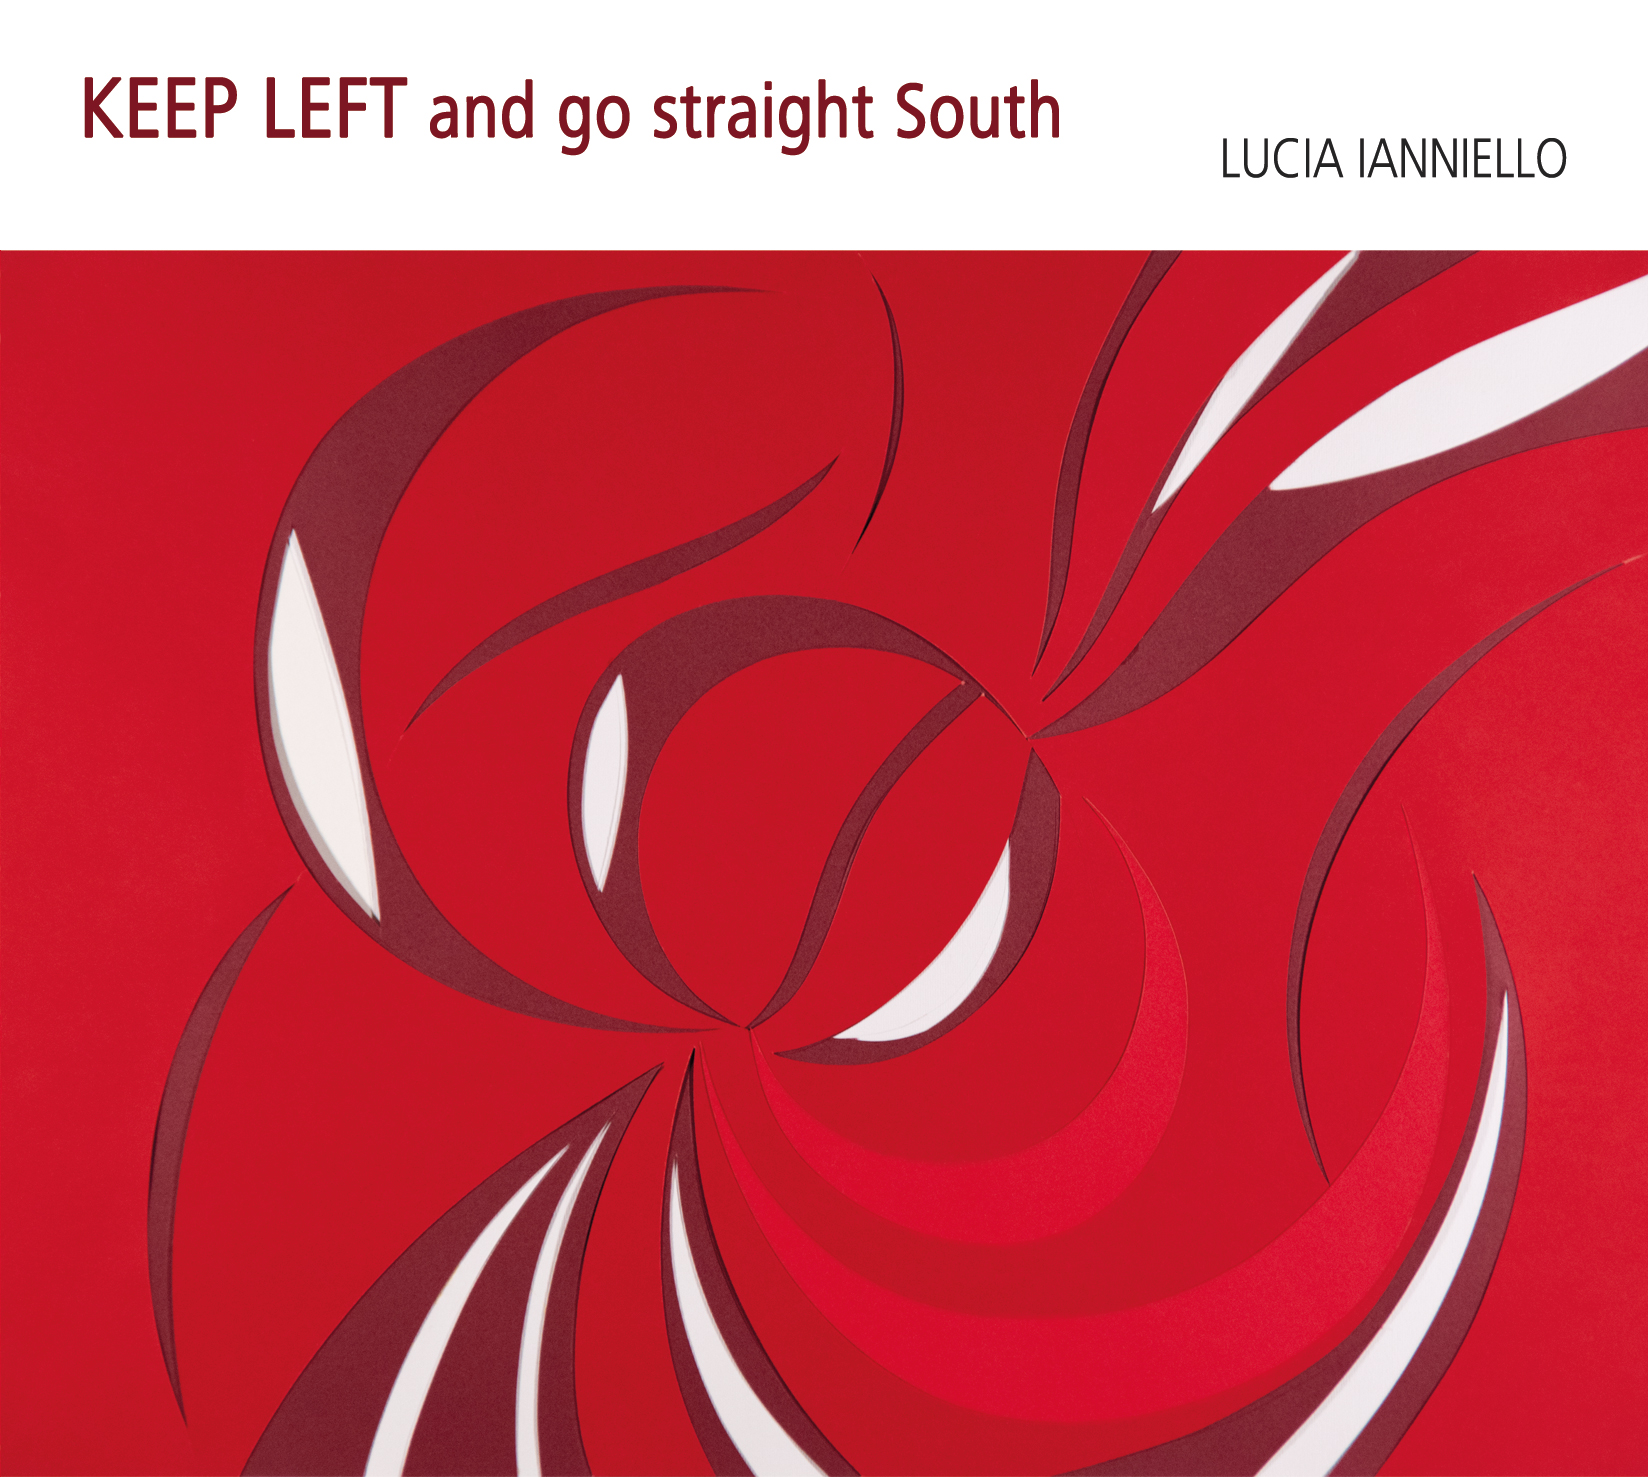 KEEP LEFT and go straight South